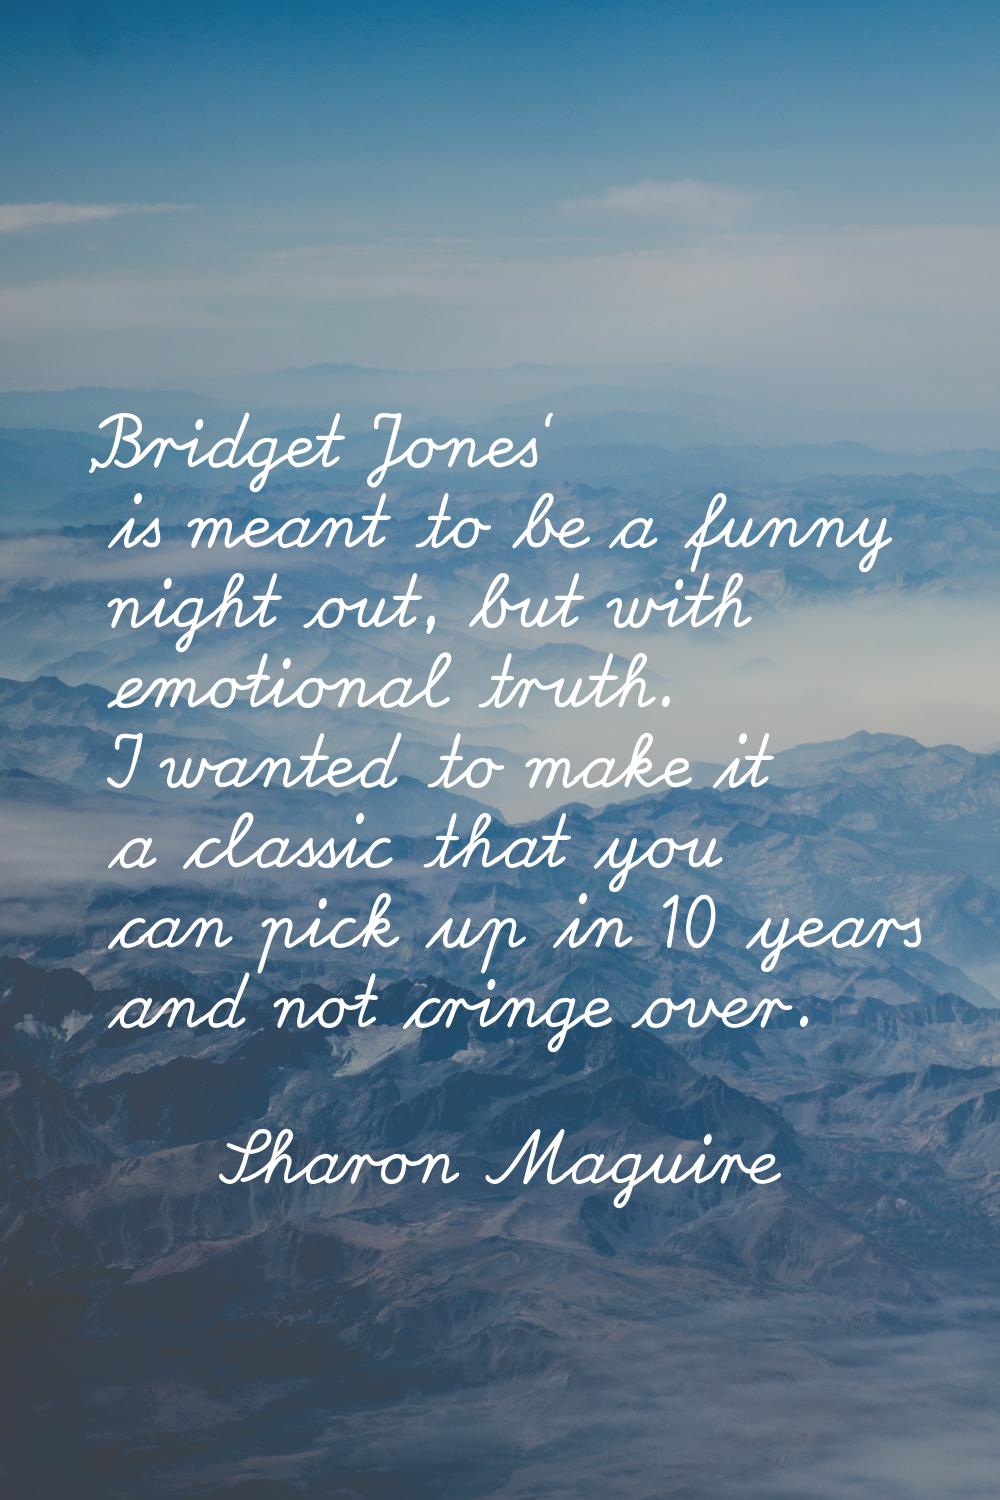 'Bridget Jones' is meant to be a funny night out, but with emotional truth. I wanted to make it a c